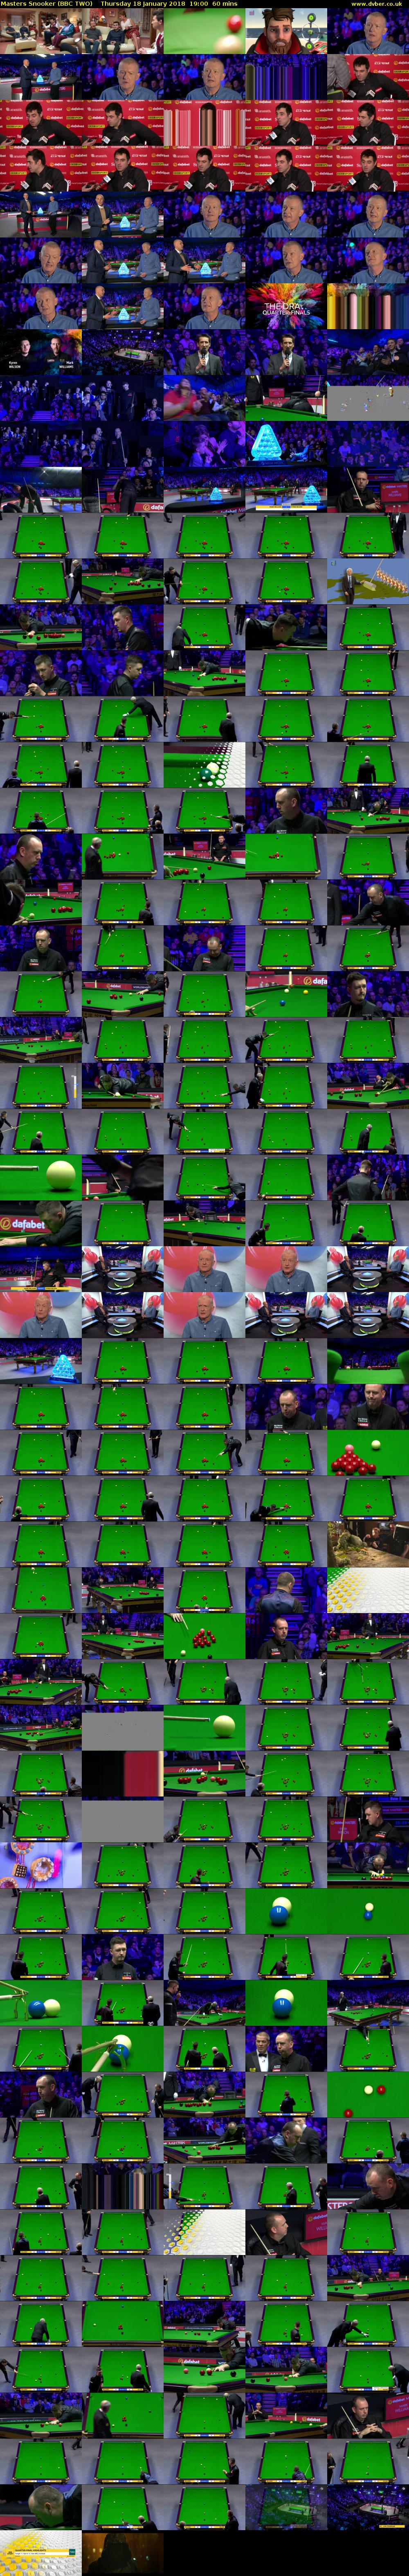 Masters Snooker (BBC TWO) Thursday 18 January 2018 19:00 - 20:00